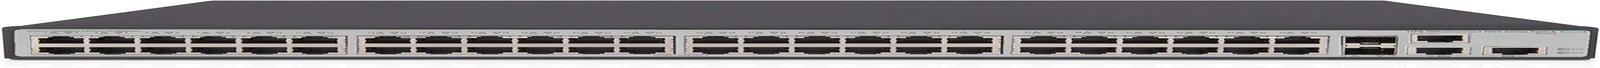 HPE Officeconnect 1950 48-Port Gig Smart Switch-48Xge|2Xsfp+|2X10Gbase-T (JG961A